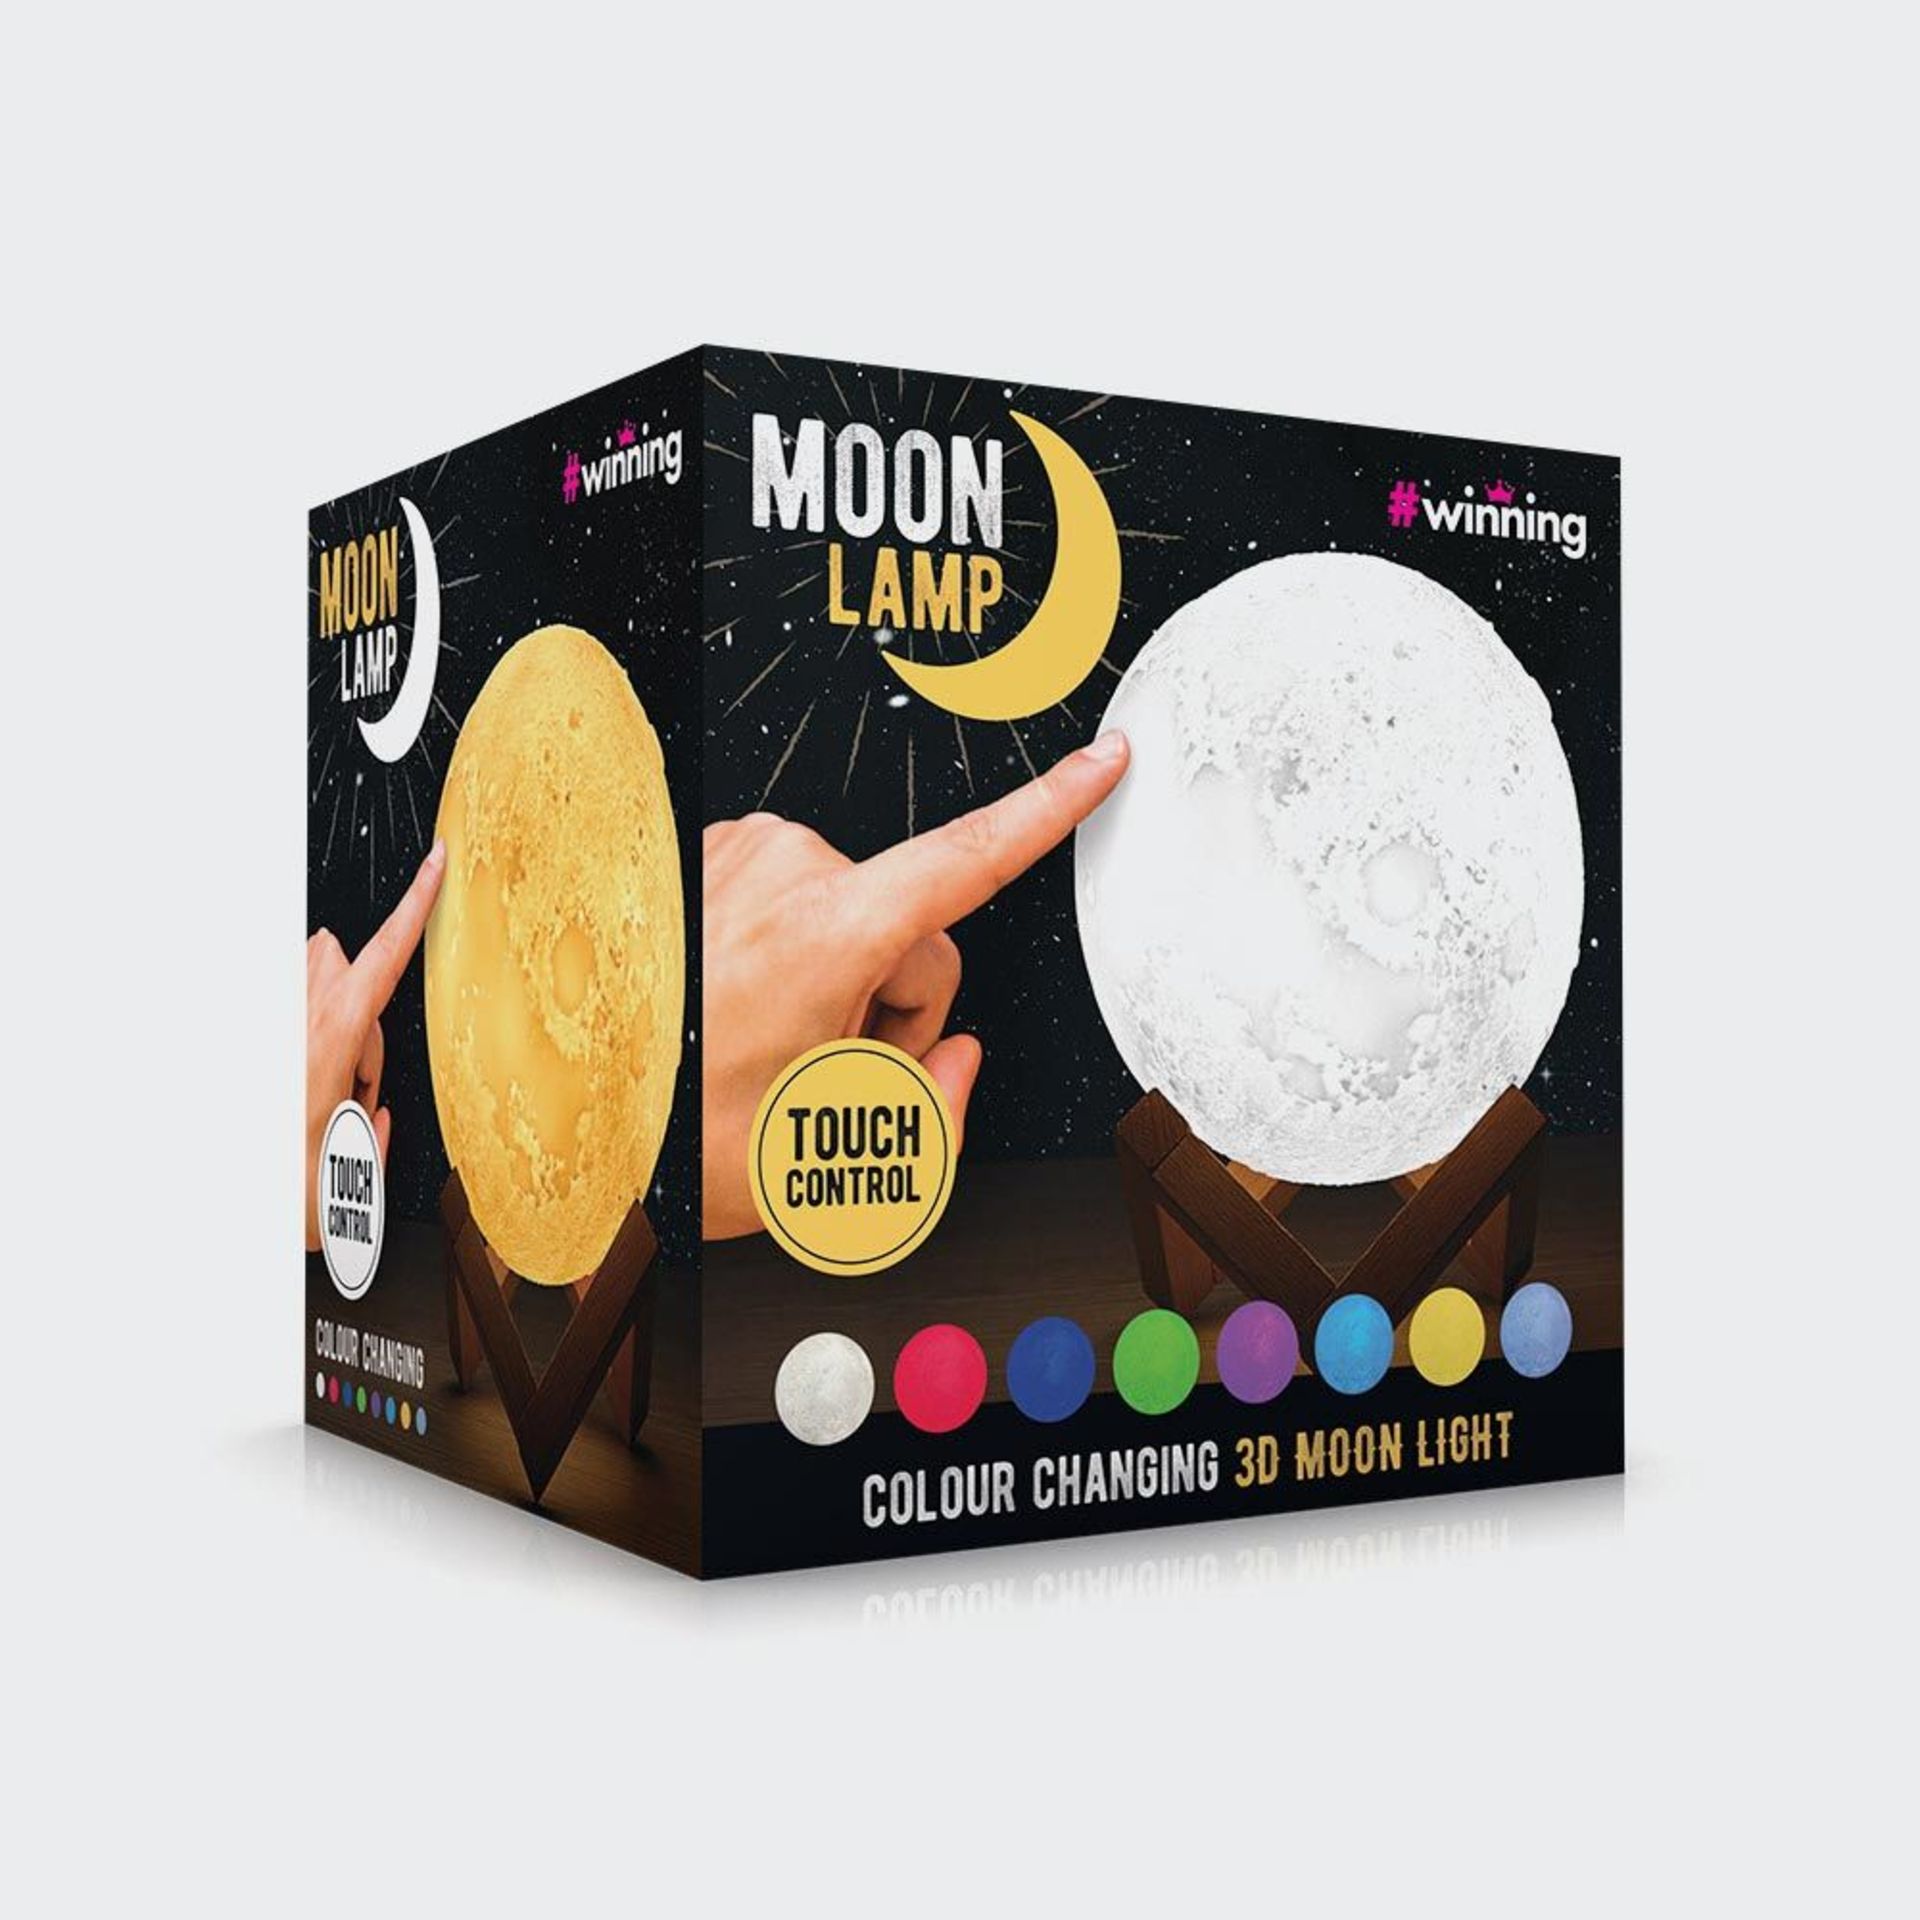 10x #Winning Colour Changing Moon Lamp RRP £19.99 Each. (Units Have Return To Manufacturer Sticker) - Image 2 of 3